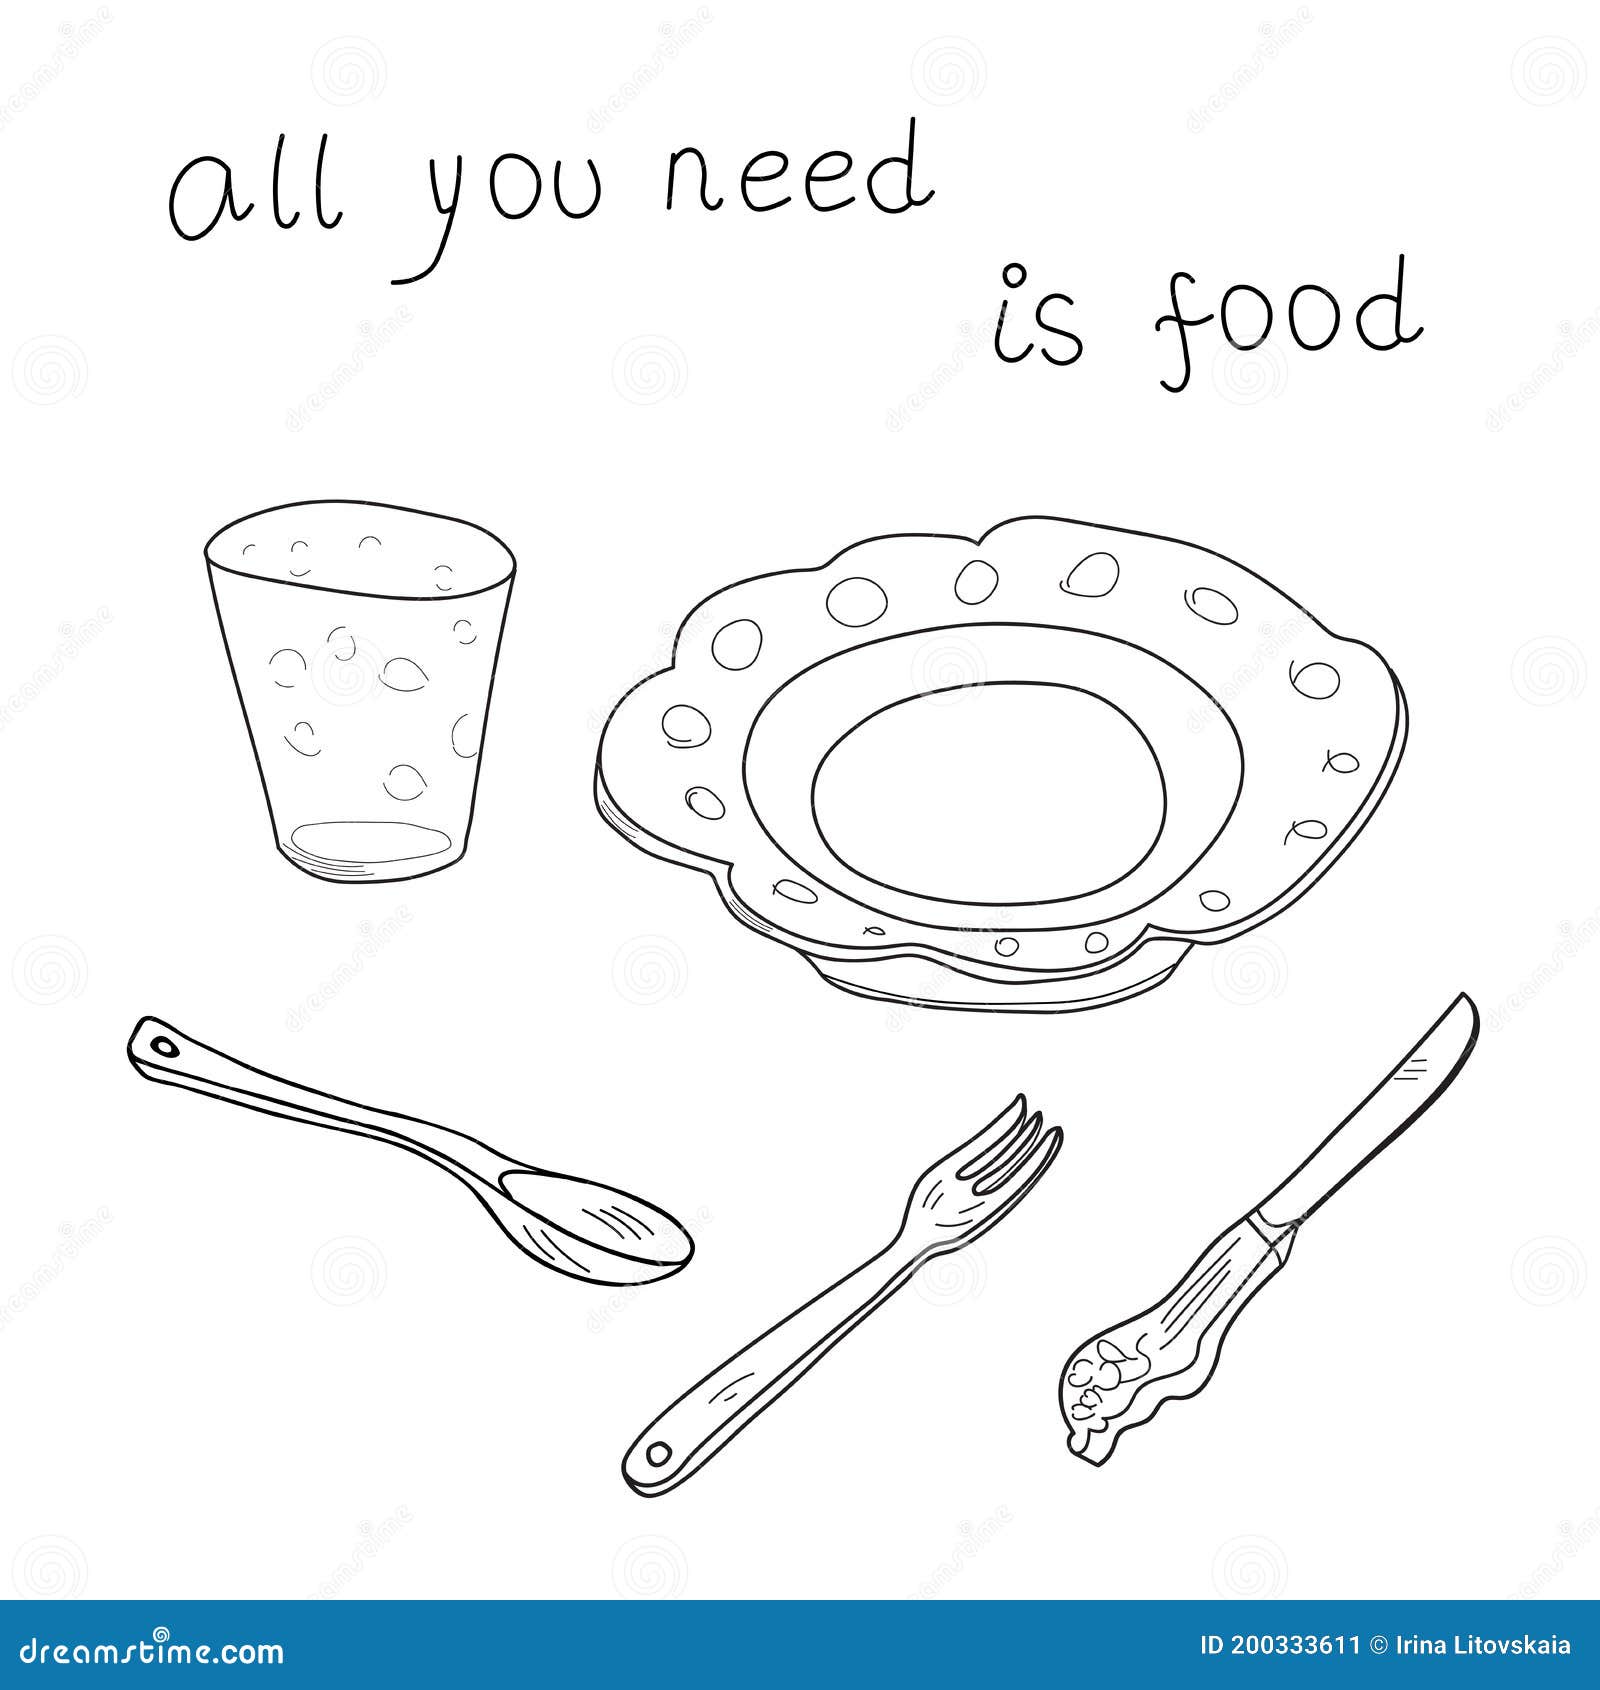 Plate, Glass, Knife, Spoon, Fork Cartoon Doodle Sketch. All You Need is  Food Vector Artistic Outline Illustration Stock Vector - Illustration of  meal, dish: 200333611